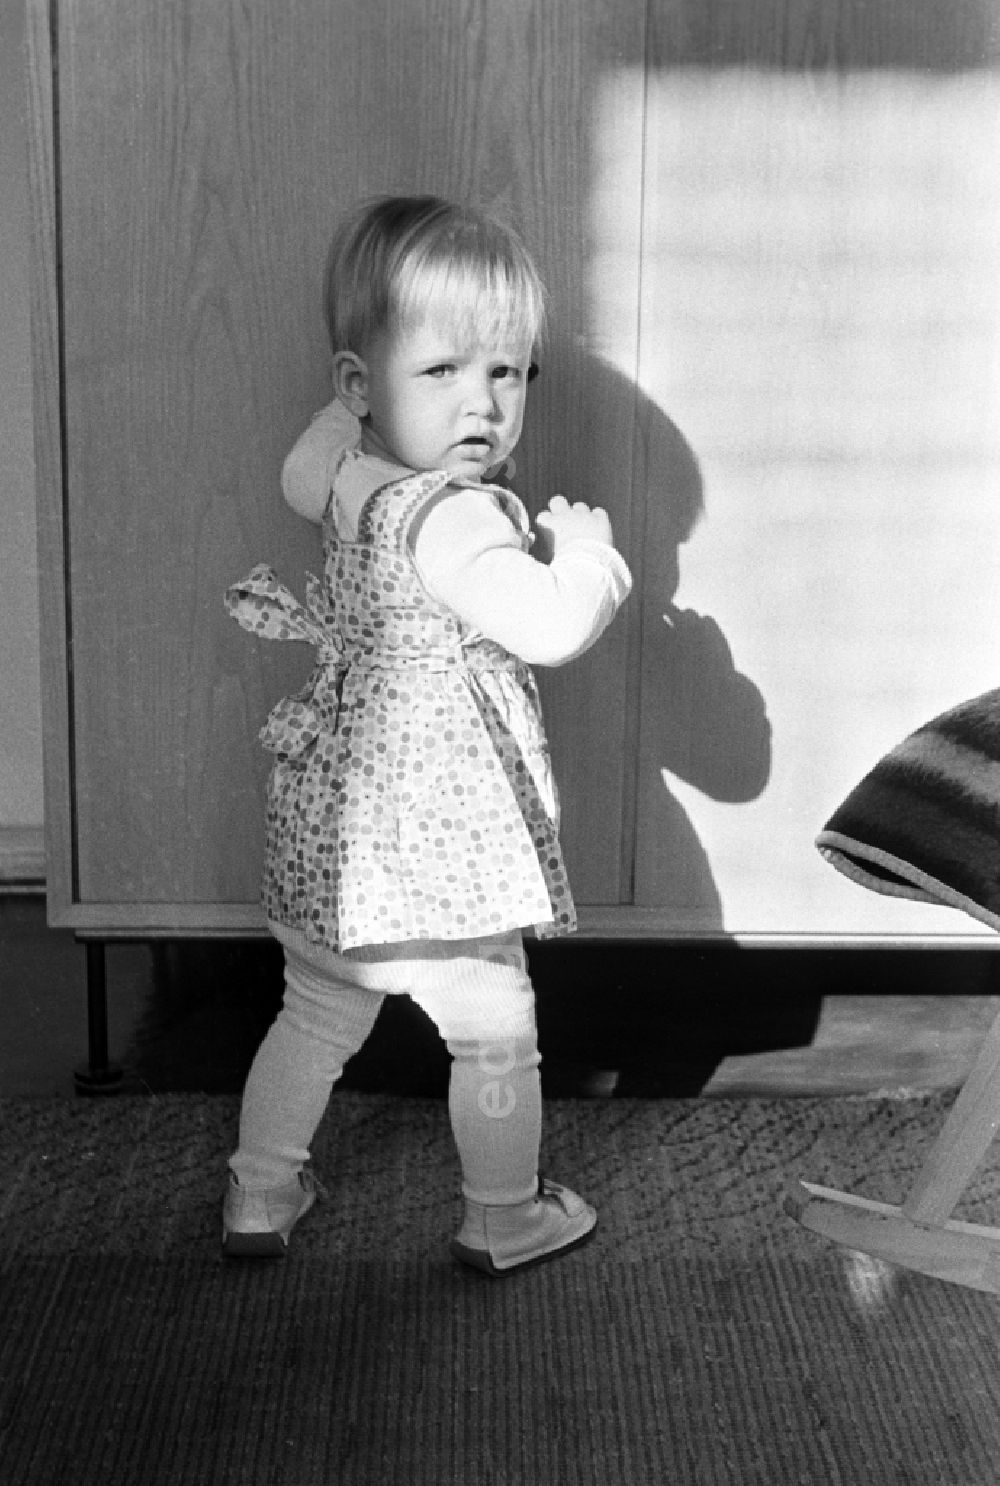 GDR photo archive: Berlin - Friedrichshain - A small child at home while playing in Berlin - Friedrichshain